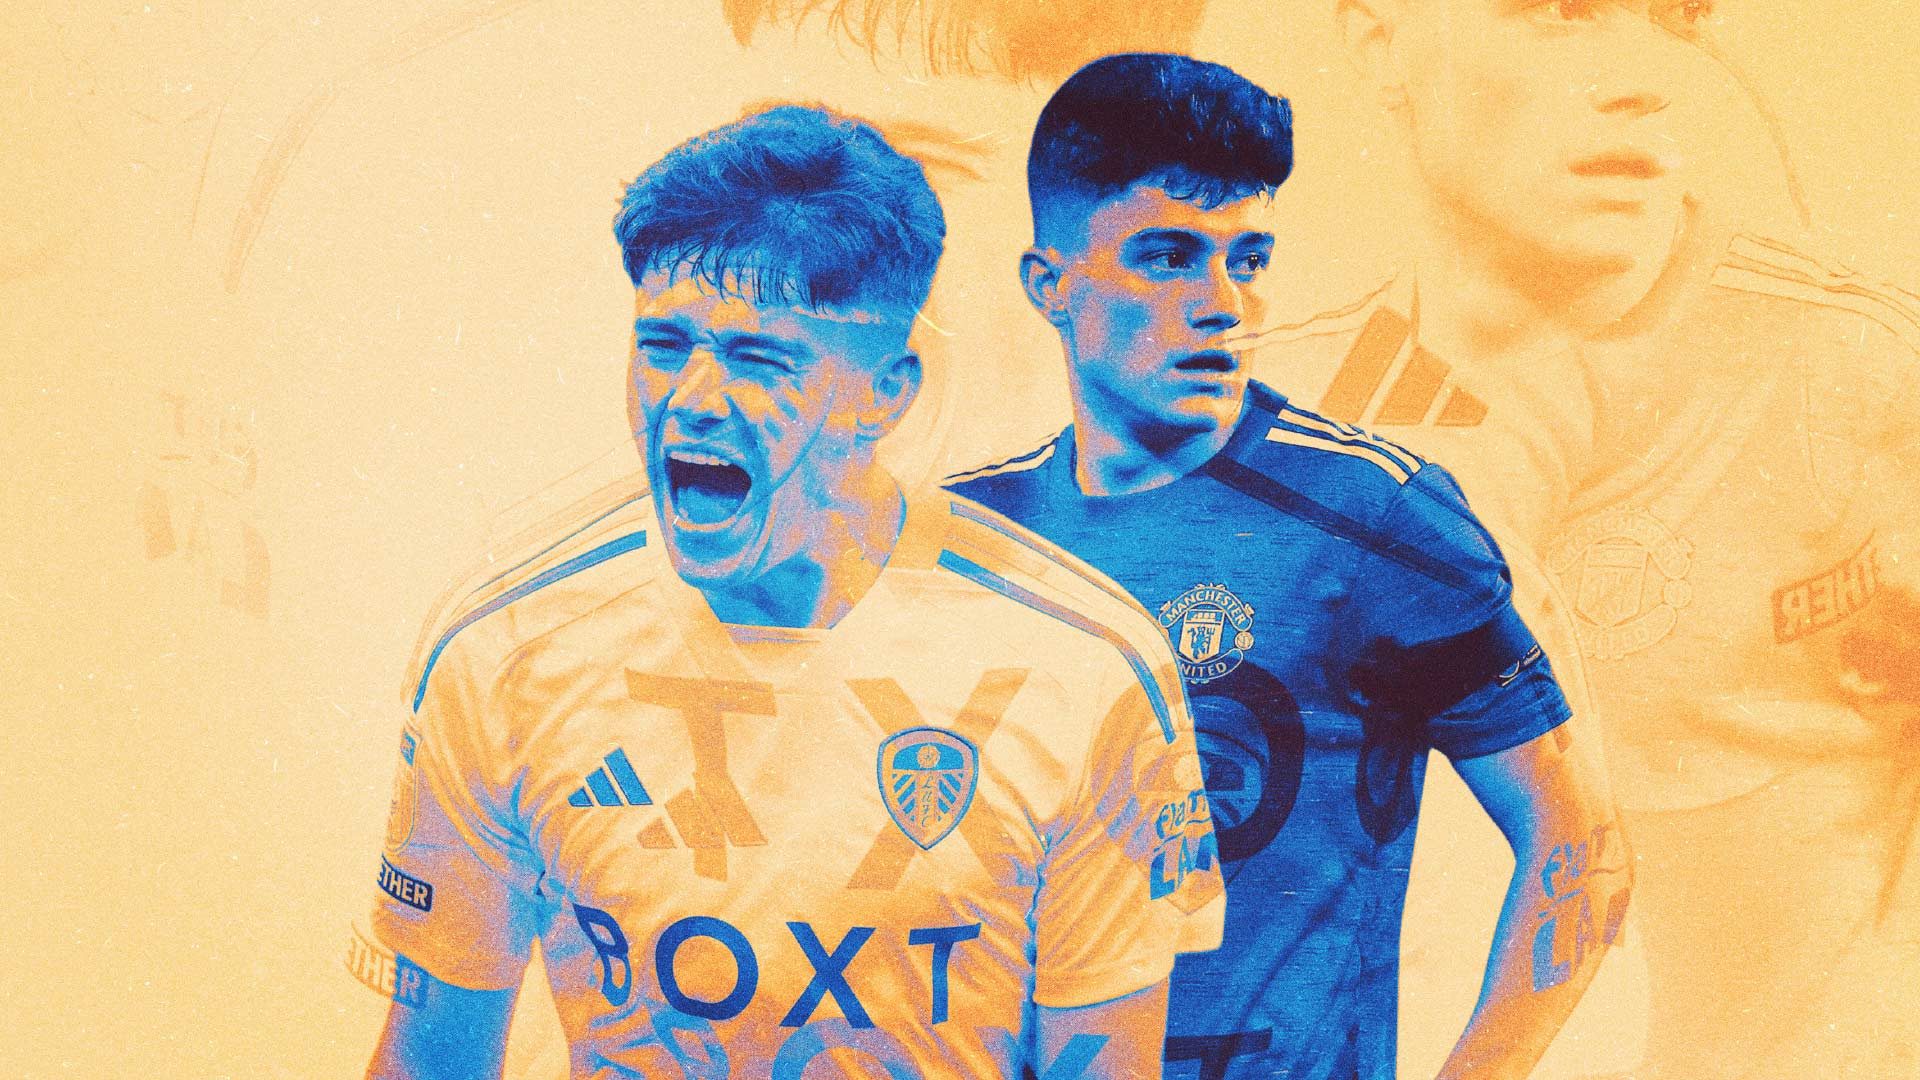 Some spooky artwork of this season's Dan James haunted by versions of Dan James from previous seasons at various different clubs